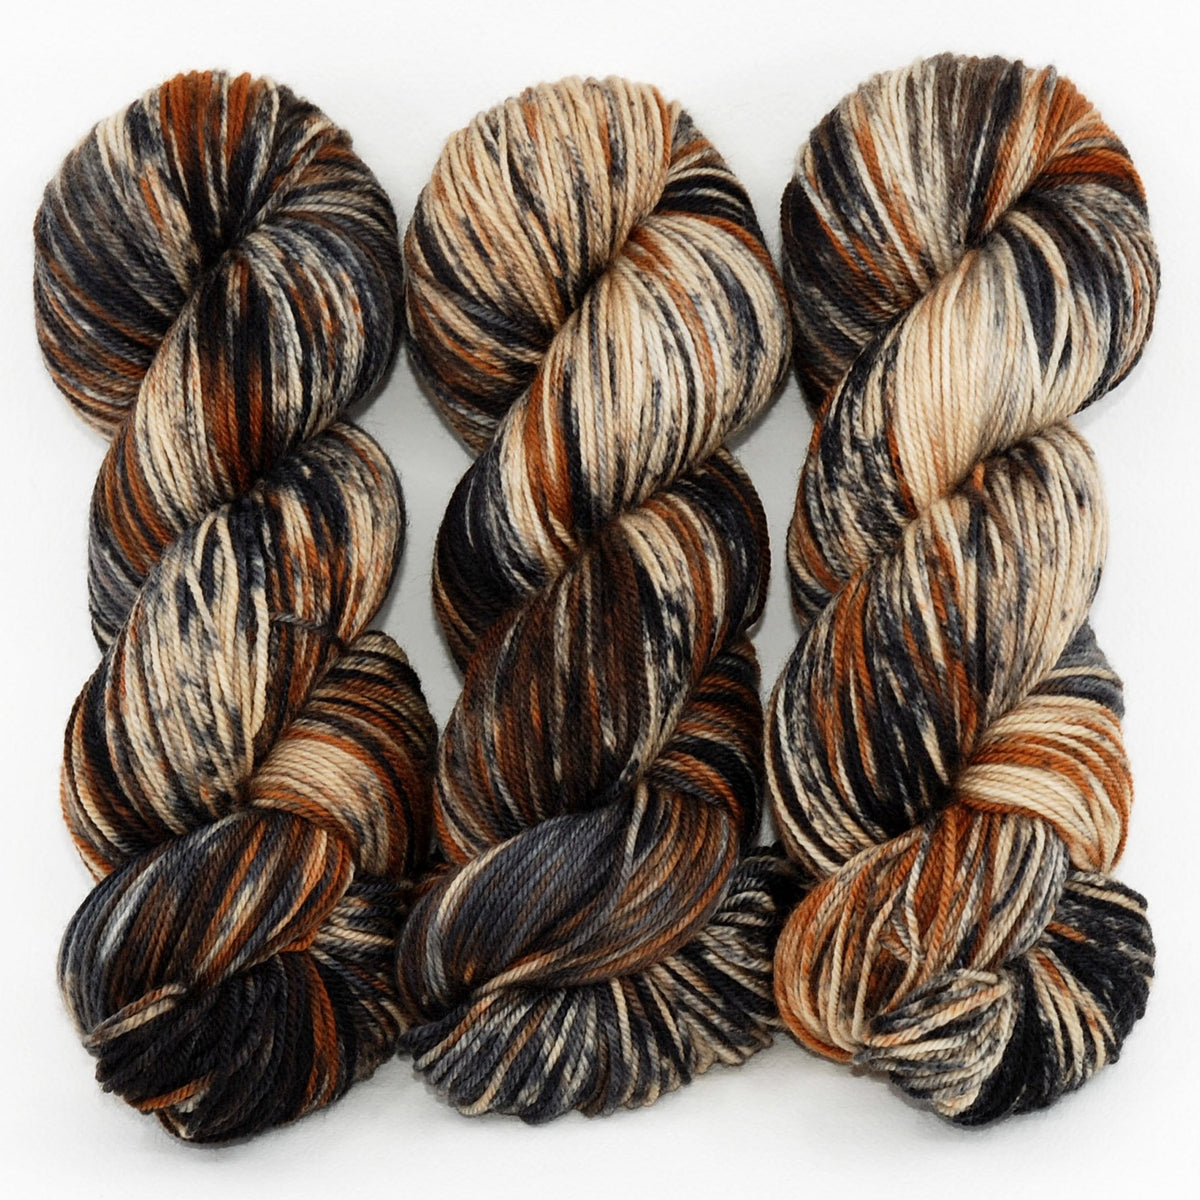 Brindle Dog - Revival Worsted - Dyed Stock